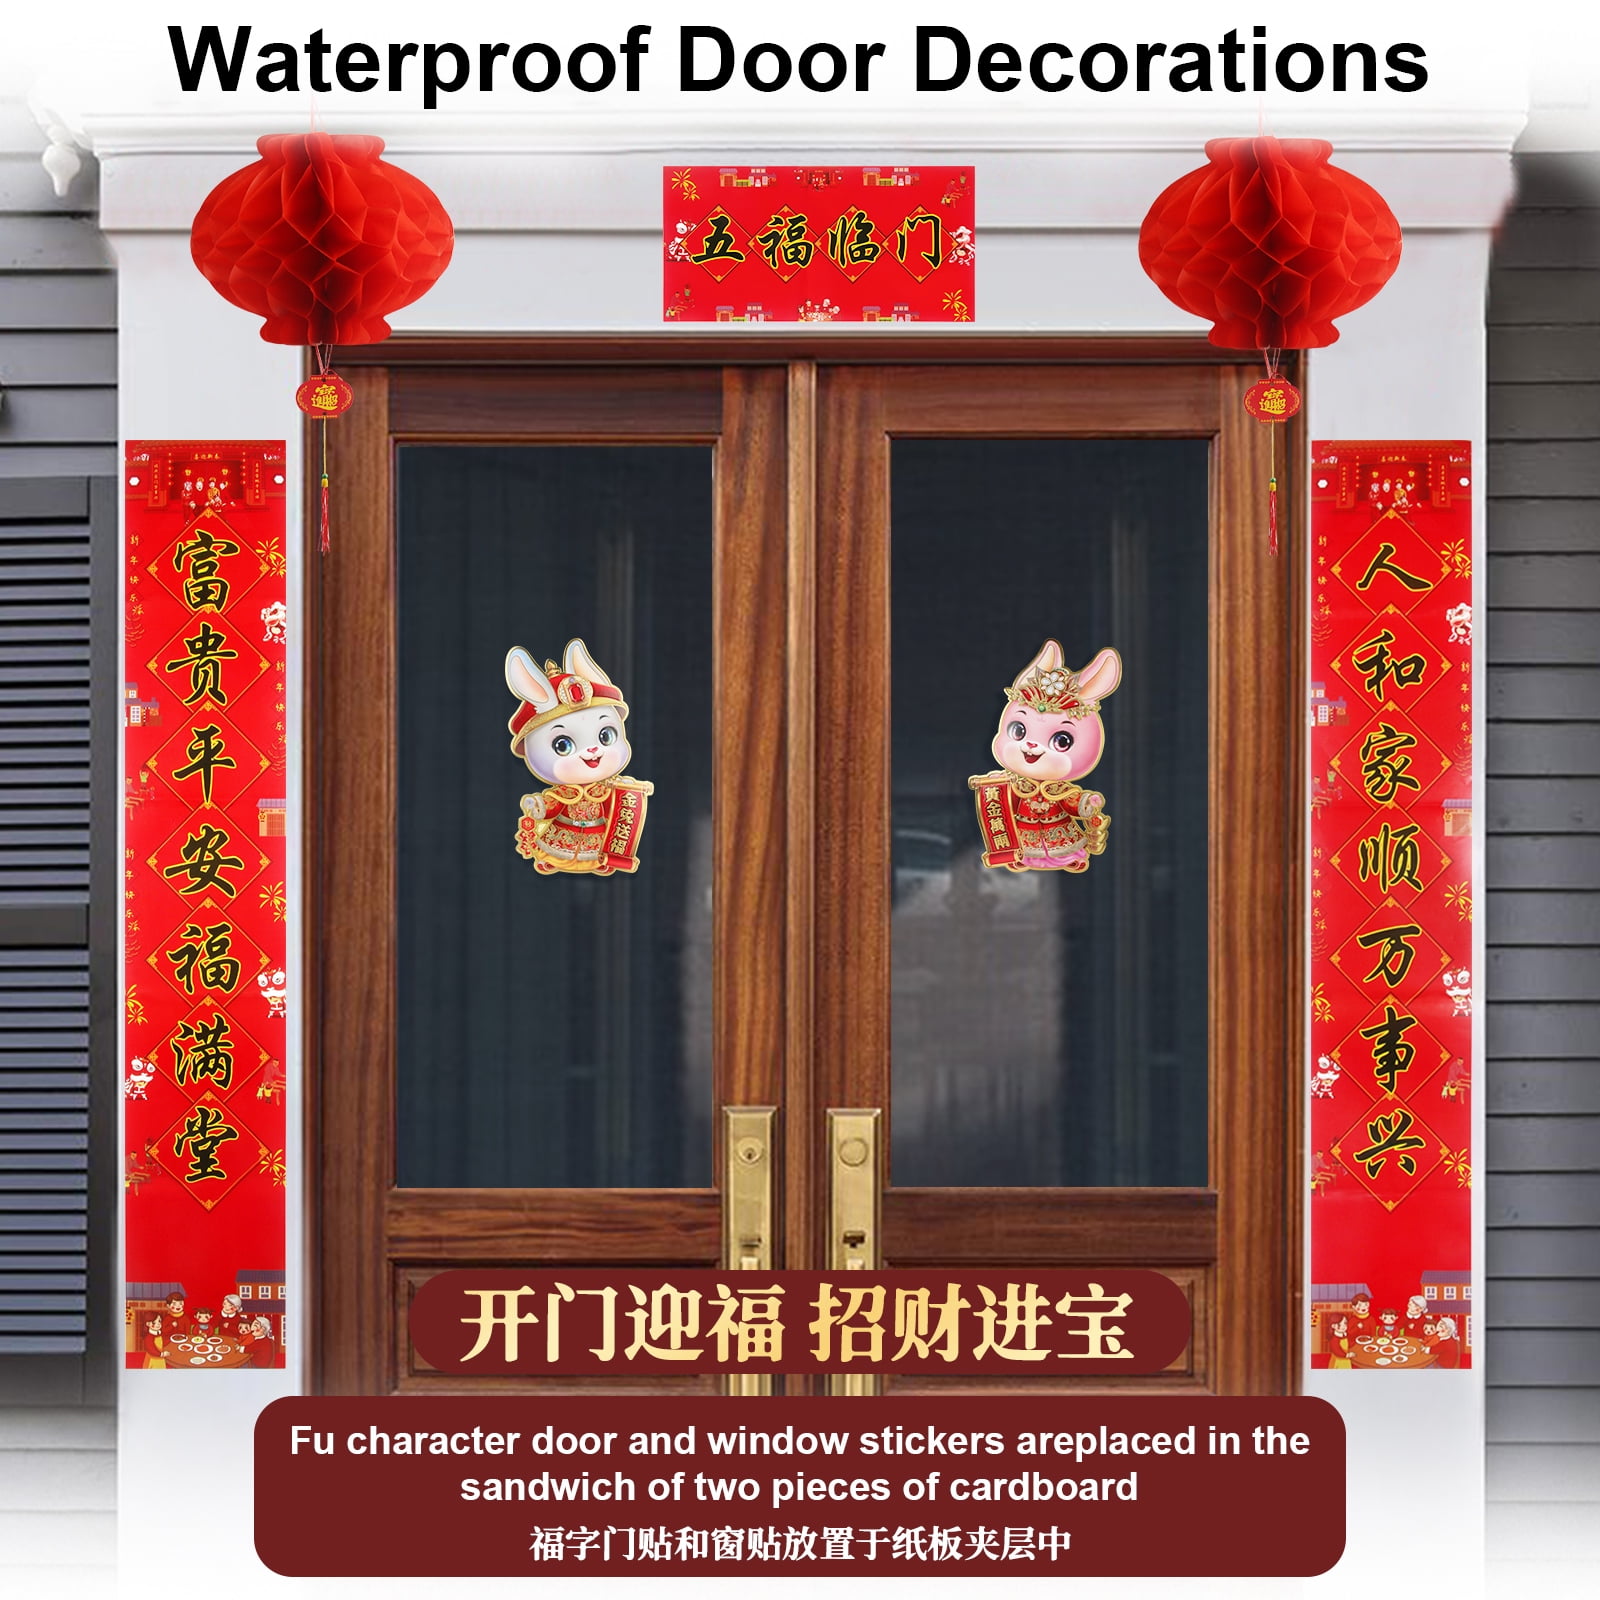 6 Festive Home Decor Ideas for Chinese New Year 2021